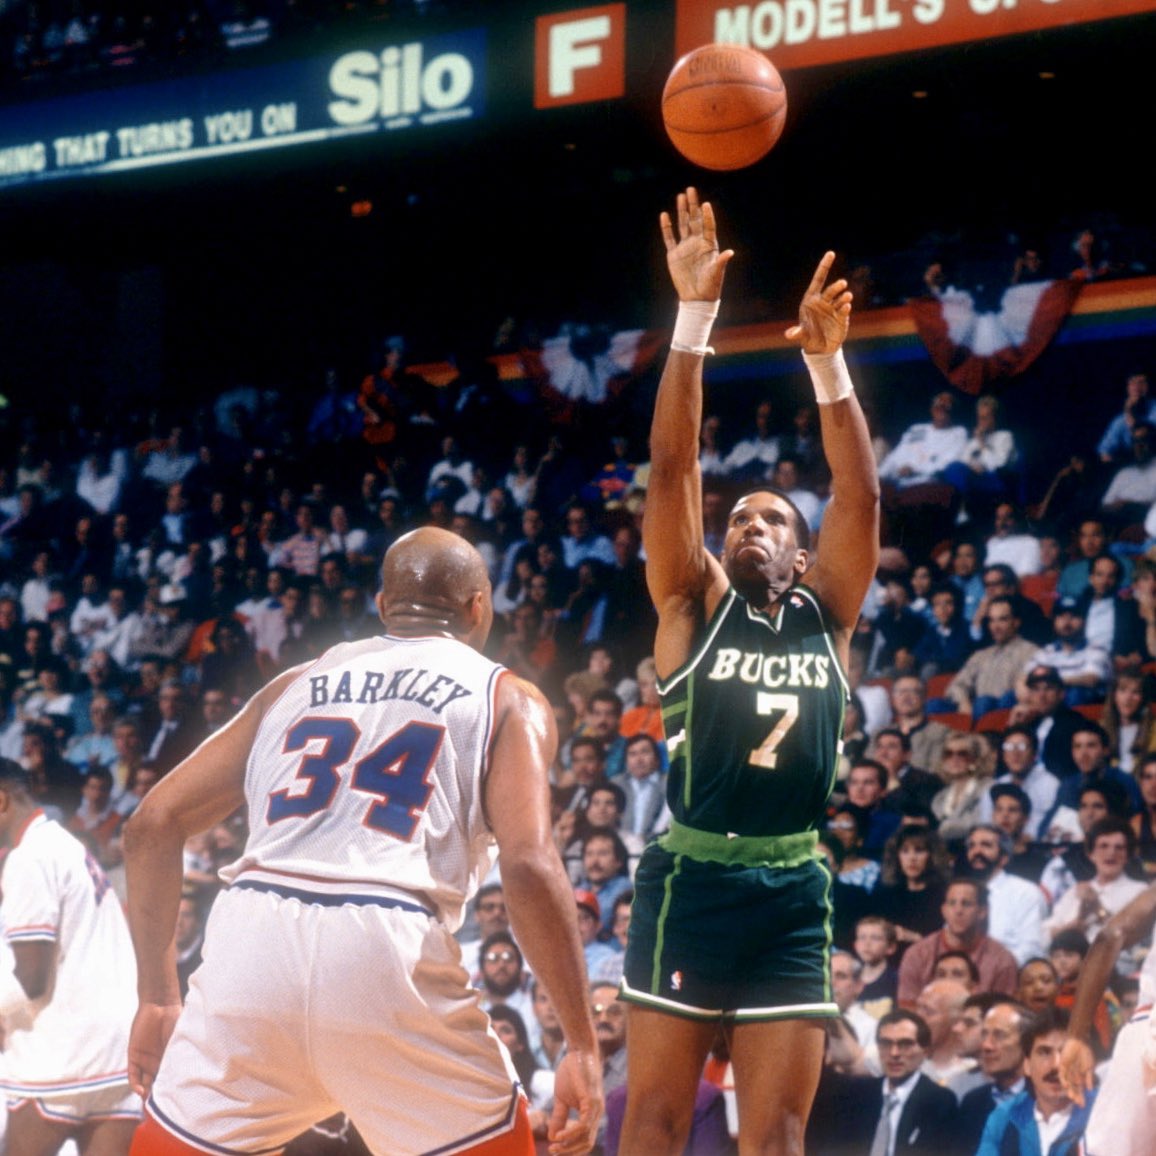 And Hall of Famer Adrian Dantley finished his 15-year career as a member of the Milwaukee Bucks, playing in 10 regular season games (followed by three playoff games) in 1991.